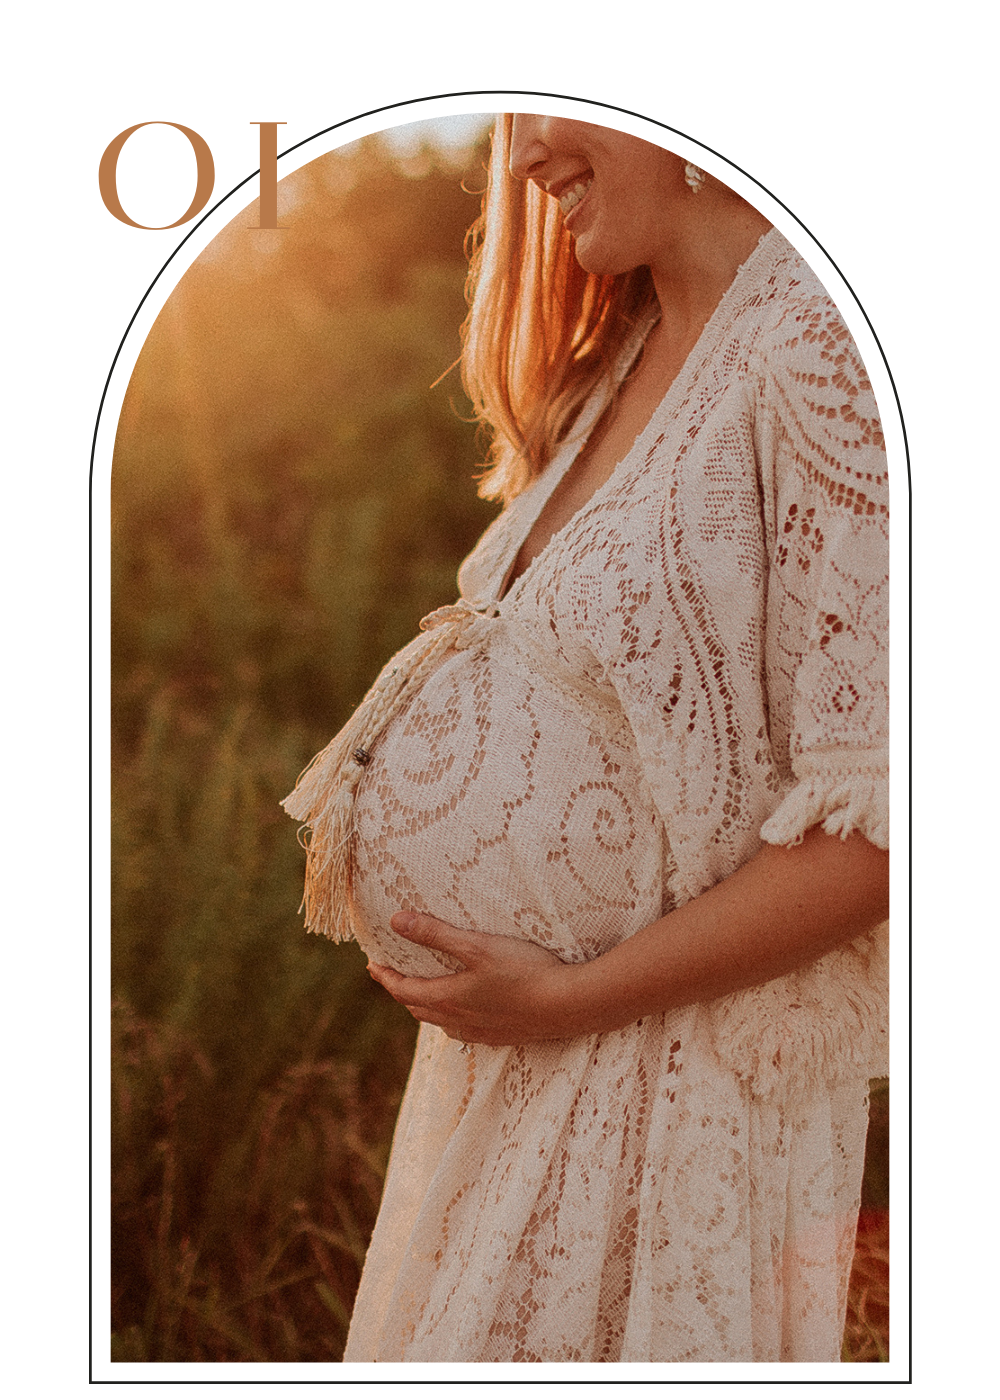 gallery of maternity images